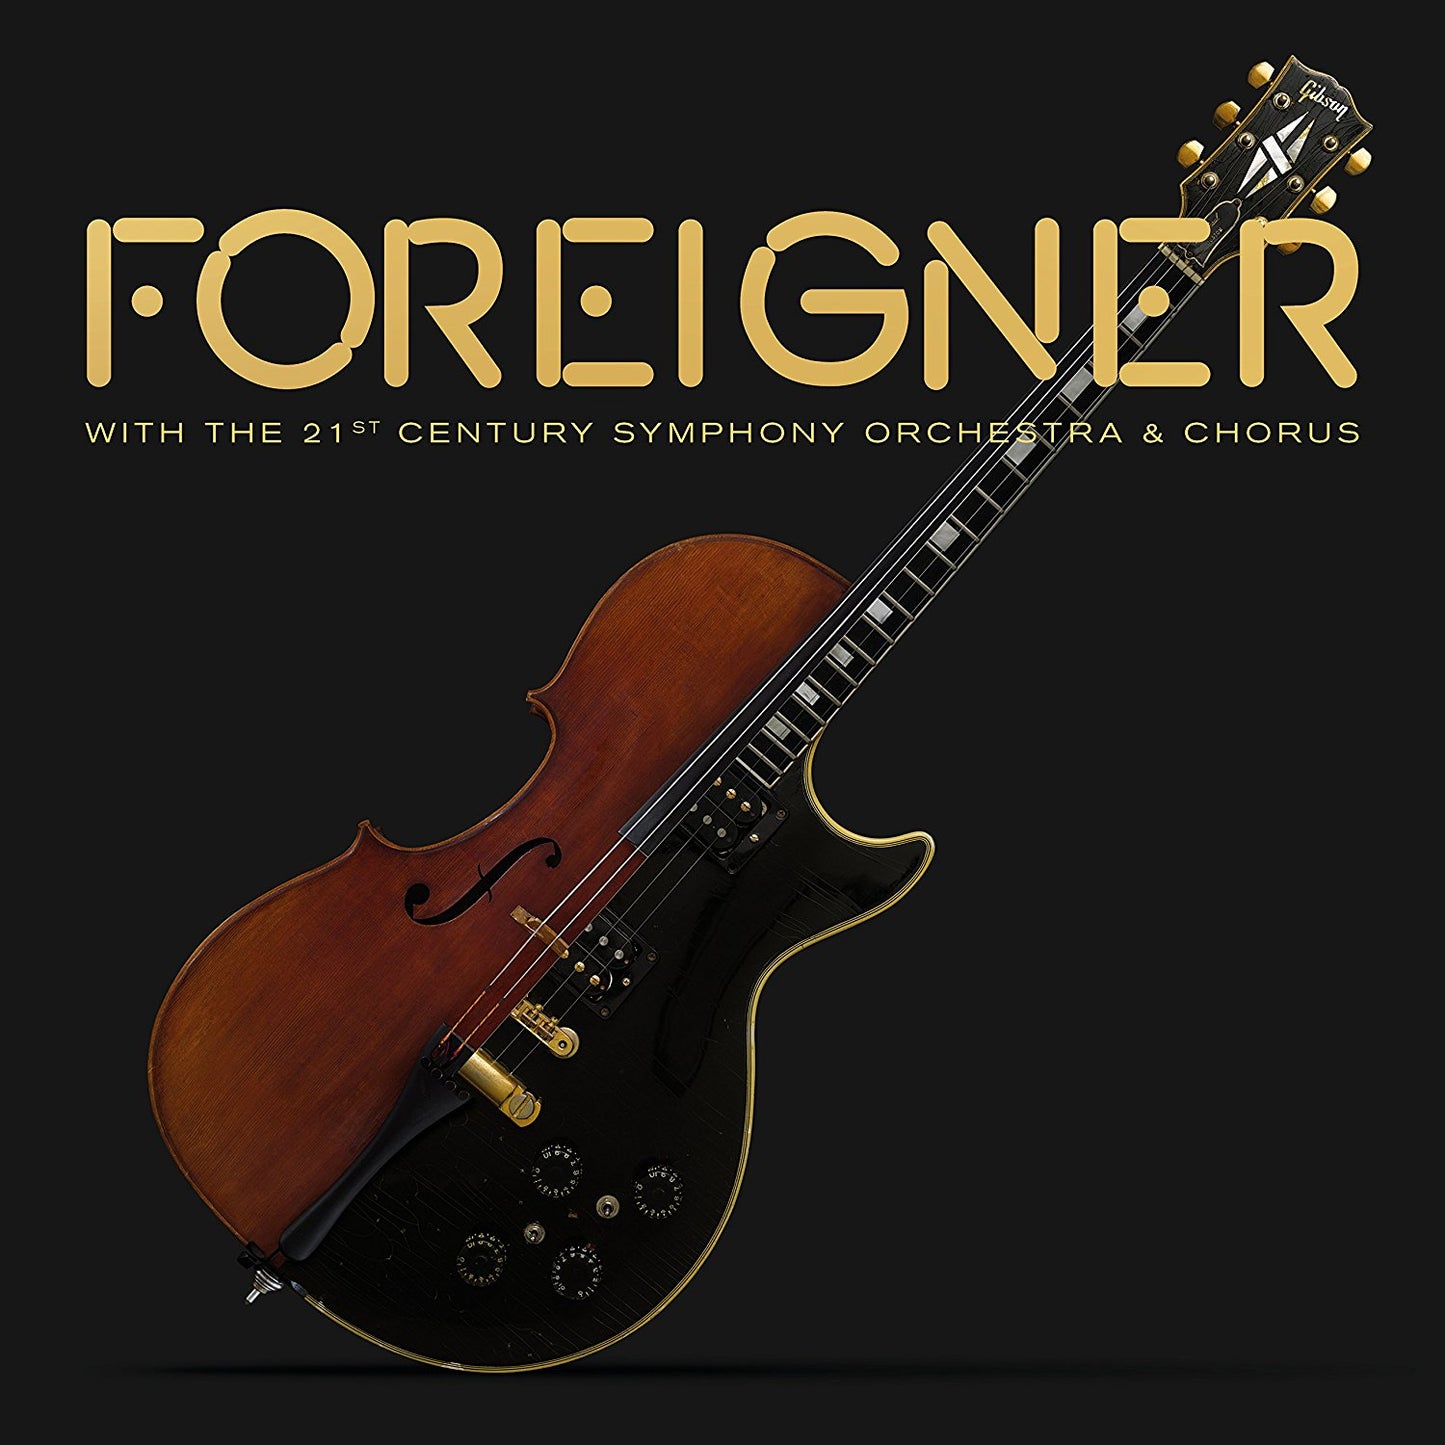 Foreigner - With the 21st Century Symphony Orchestra & Chorus